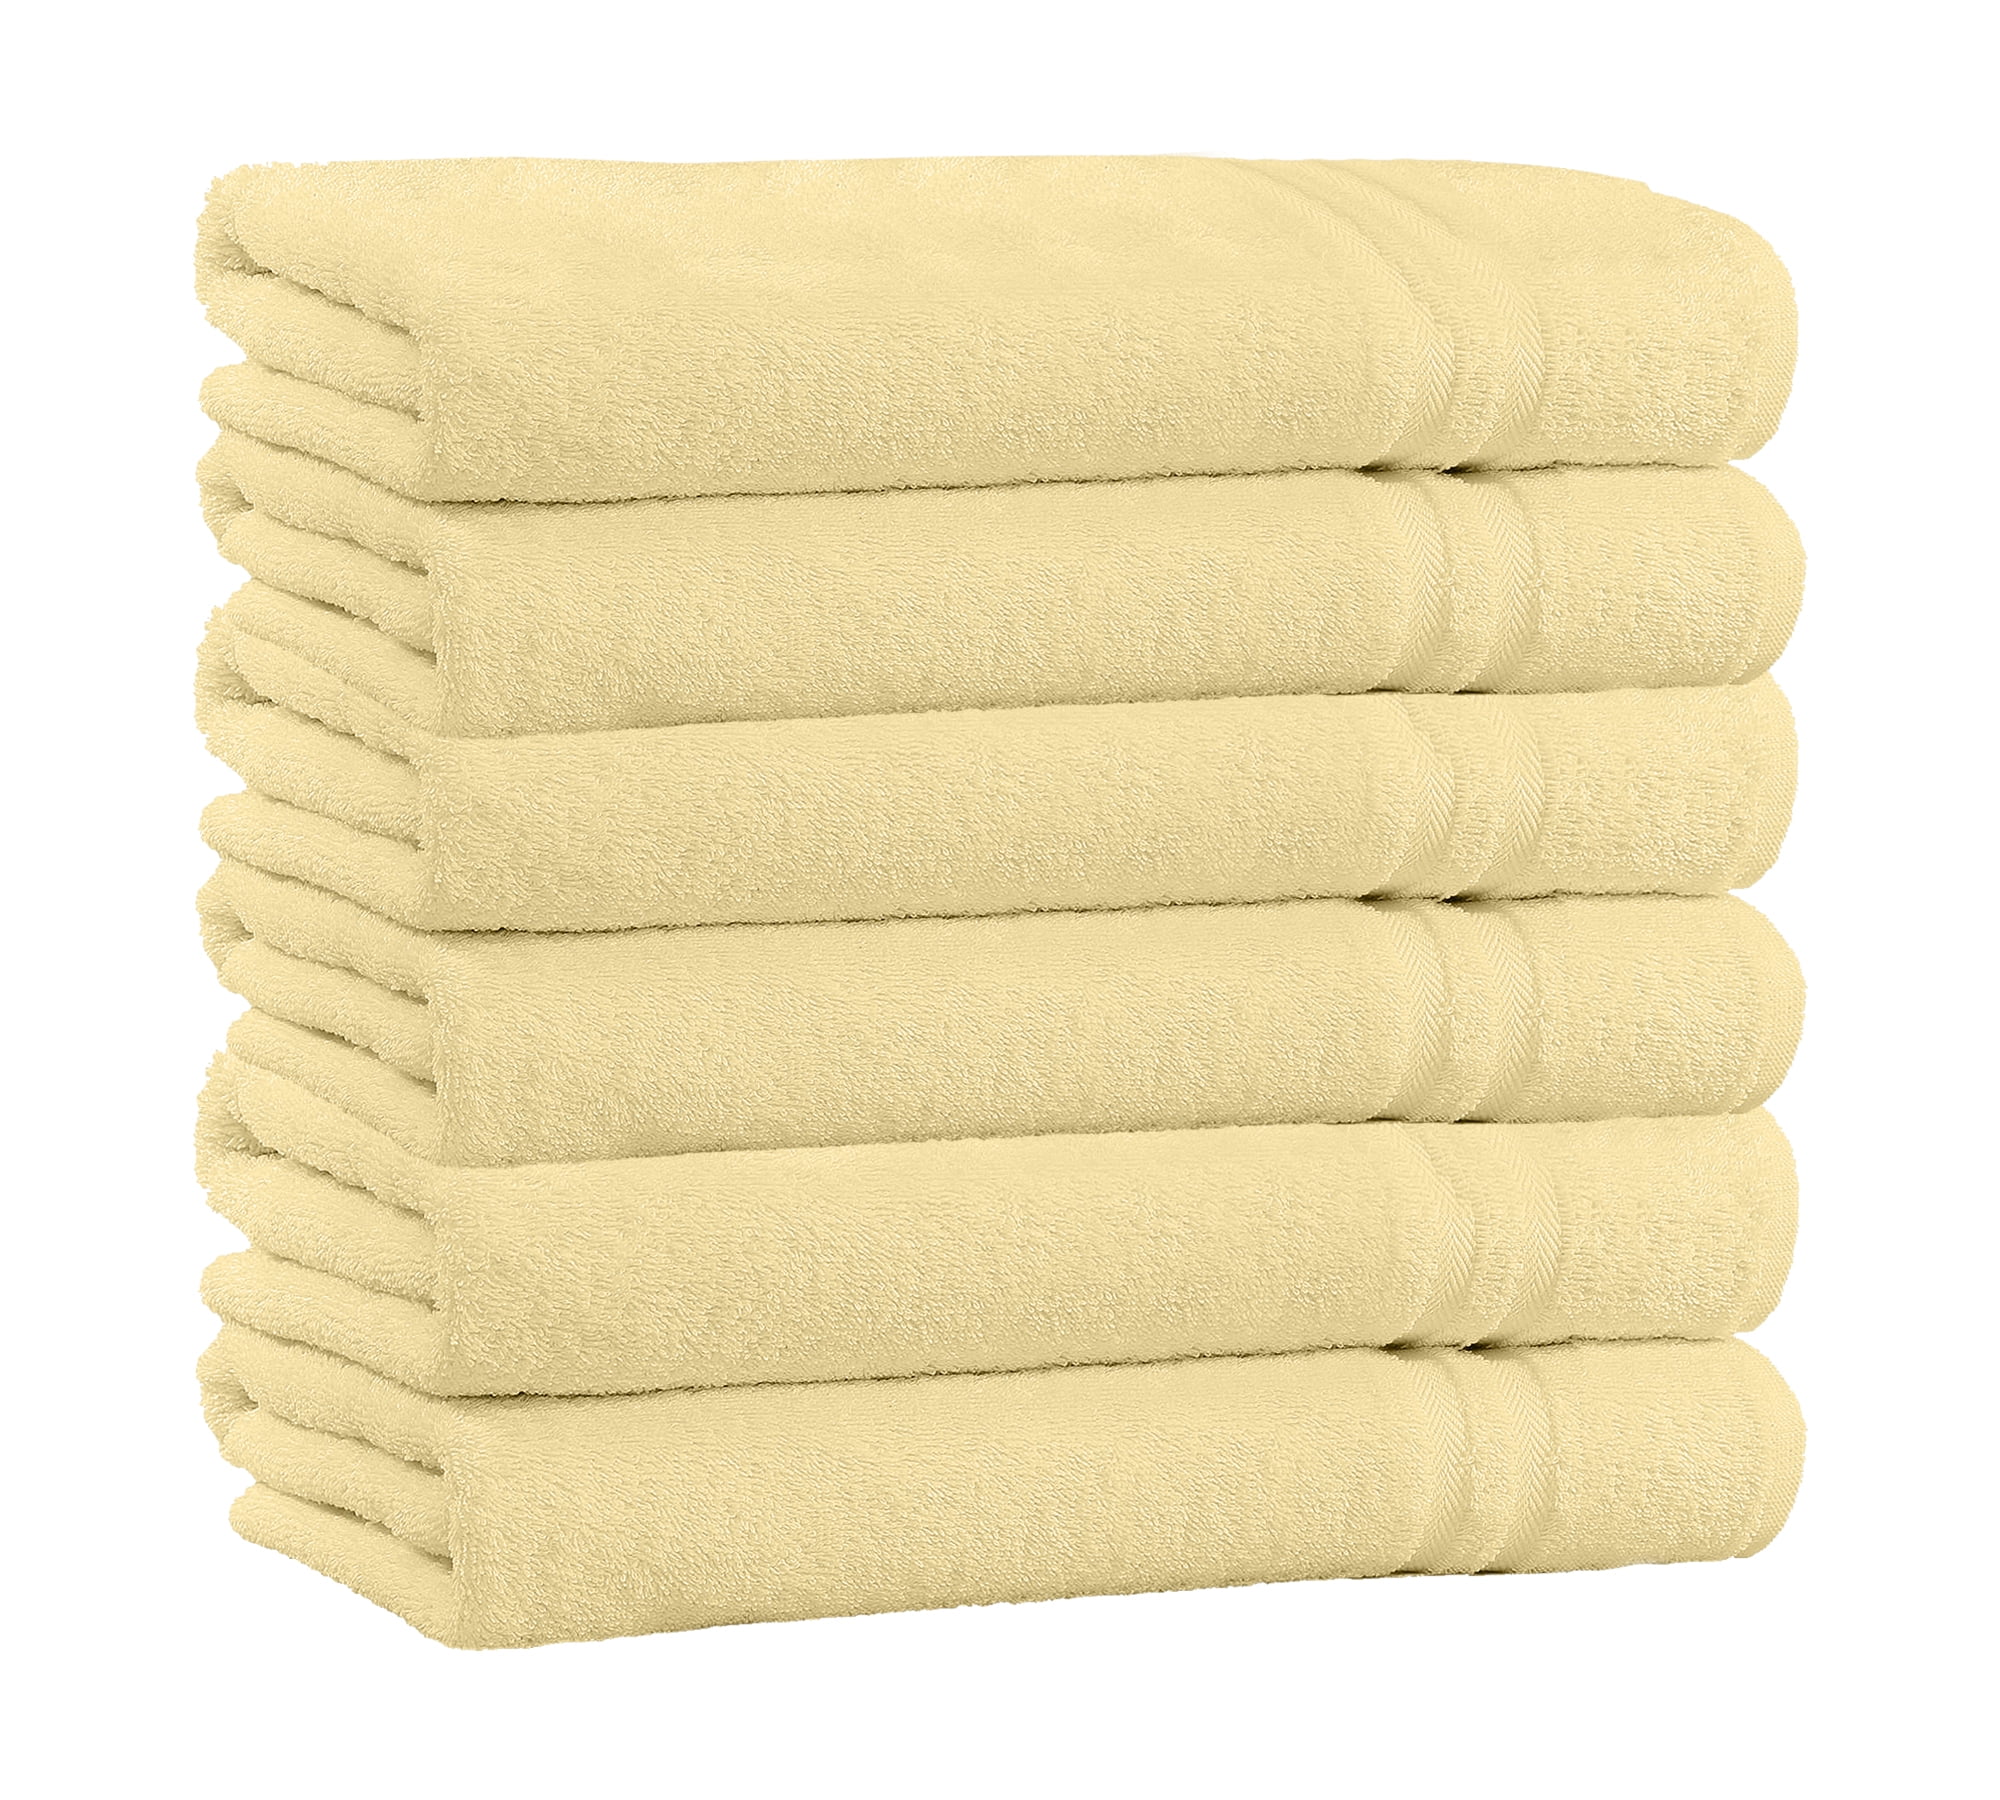 100% Cotton 4-Pack Bath Towel Sets - Extra Plush & Absorbent Sunny Yellow  Bath Towels - 56 x 28 (Sunny Yellow)